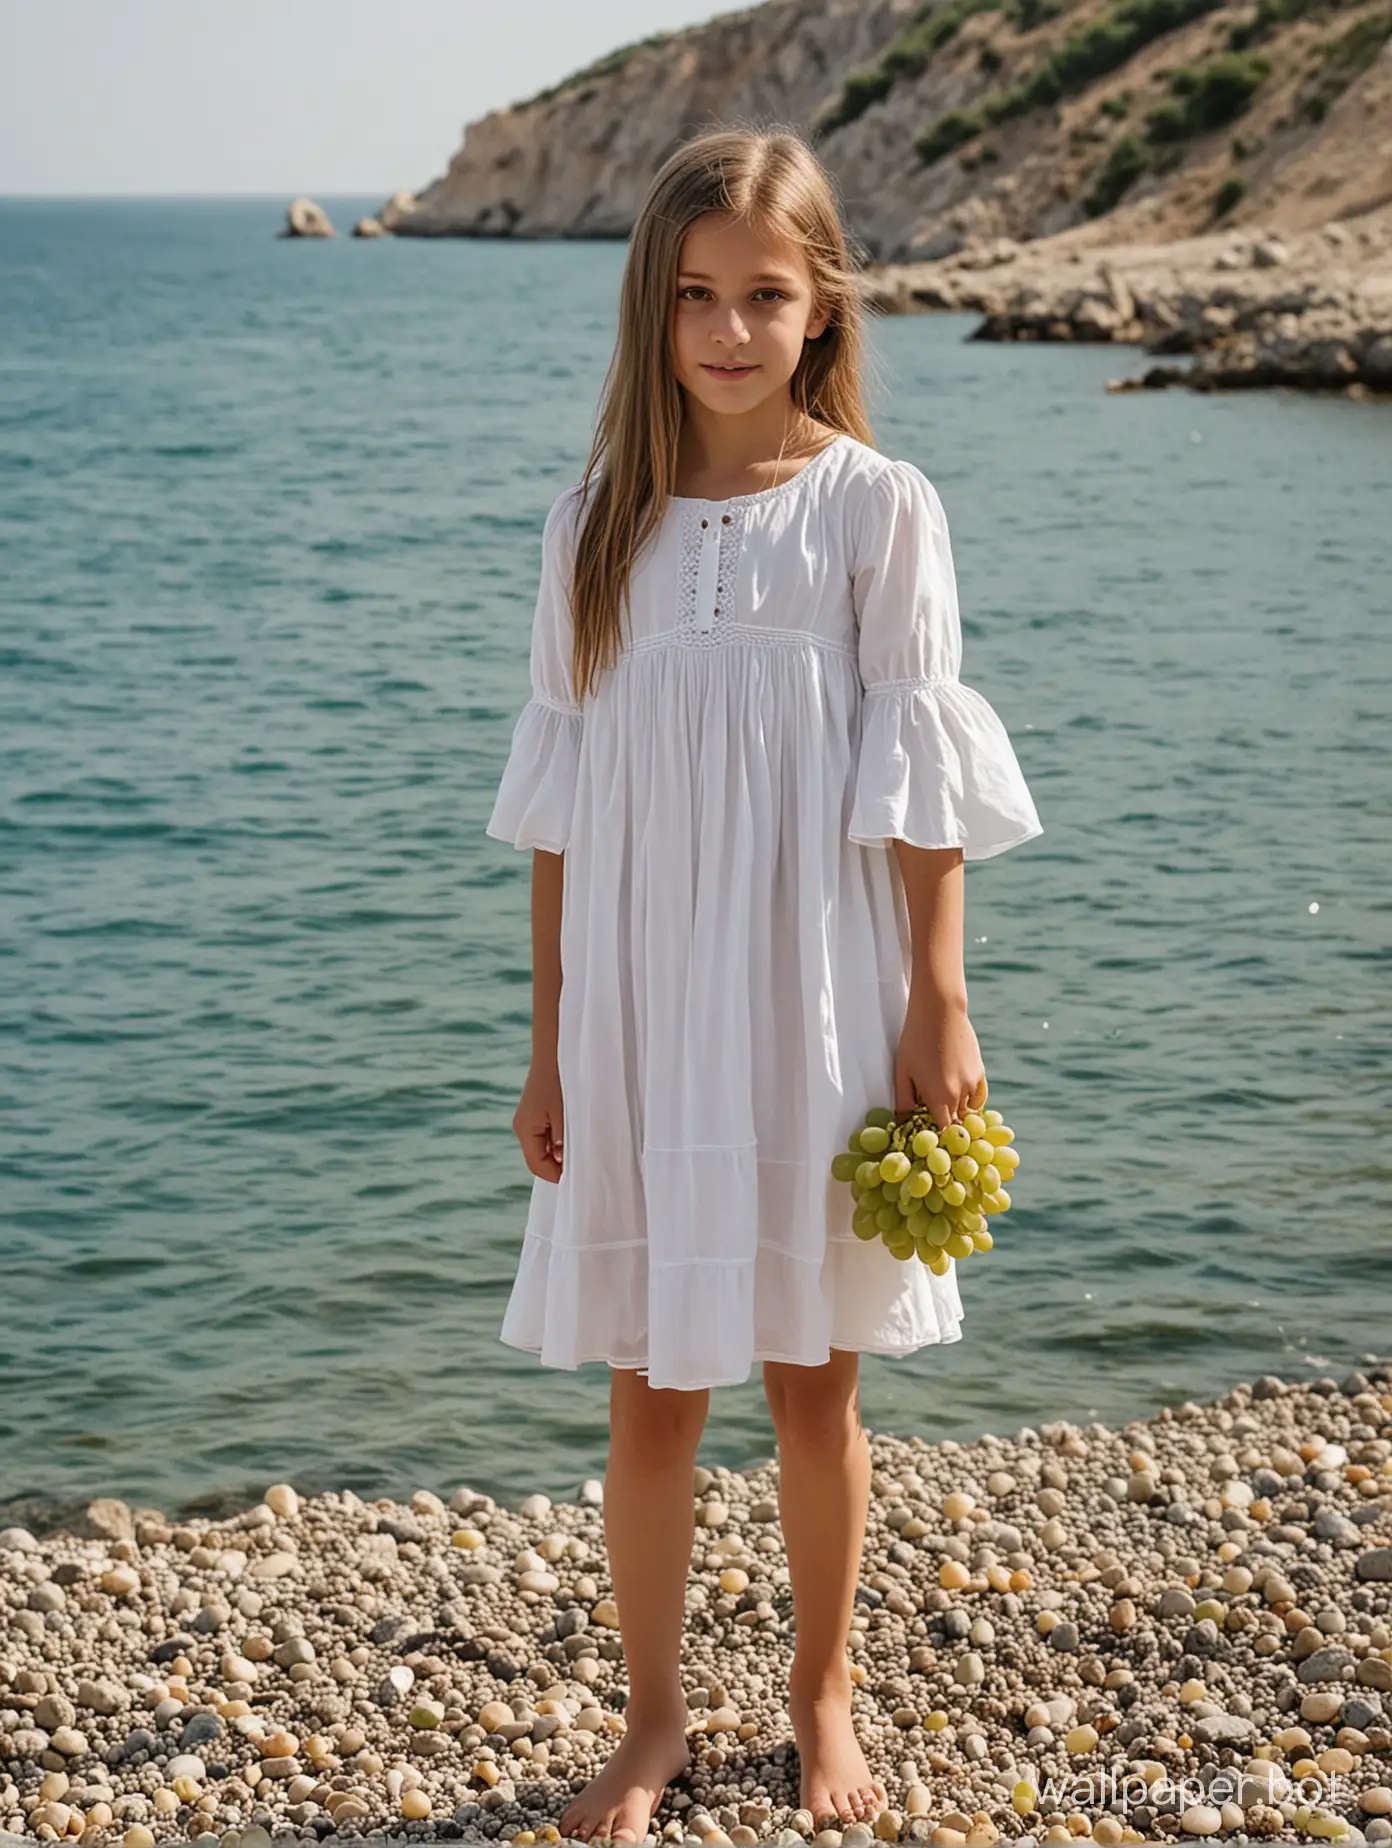 Crimea, by the sea, a 10-year-old girl in a short white dress with a bunch of grapes in her hands